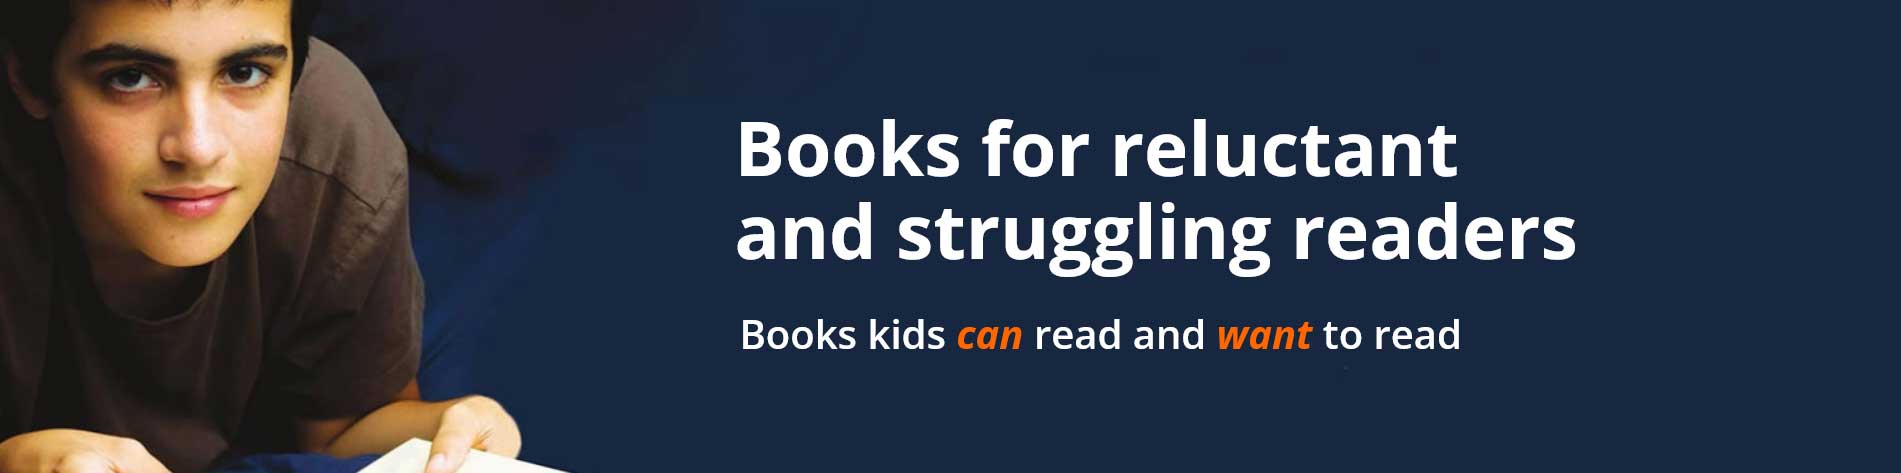 HIP HOME PAGE BANNER Books for struggling and reluctant readers